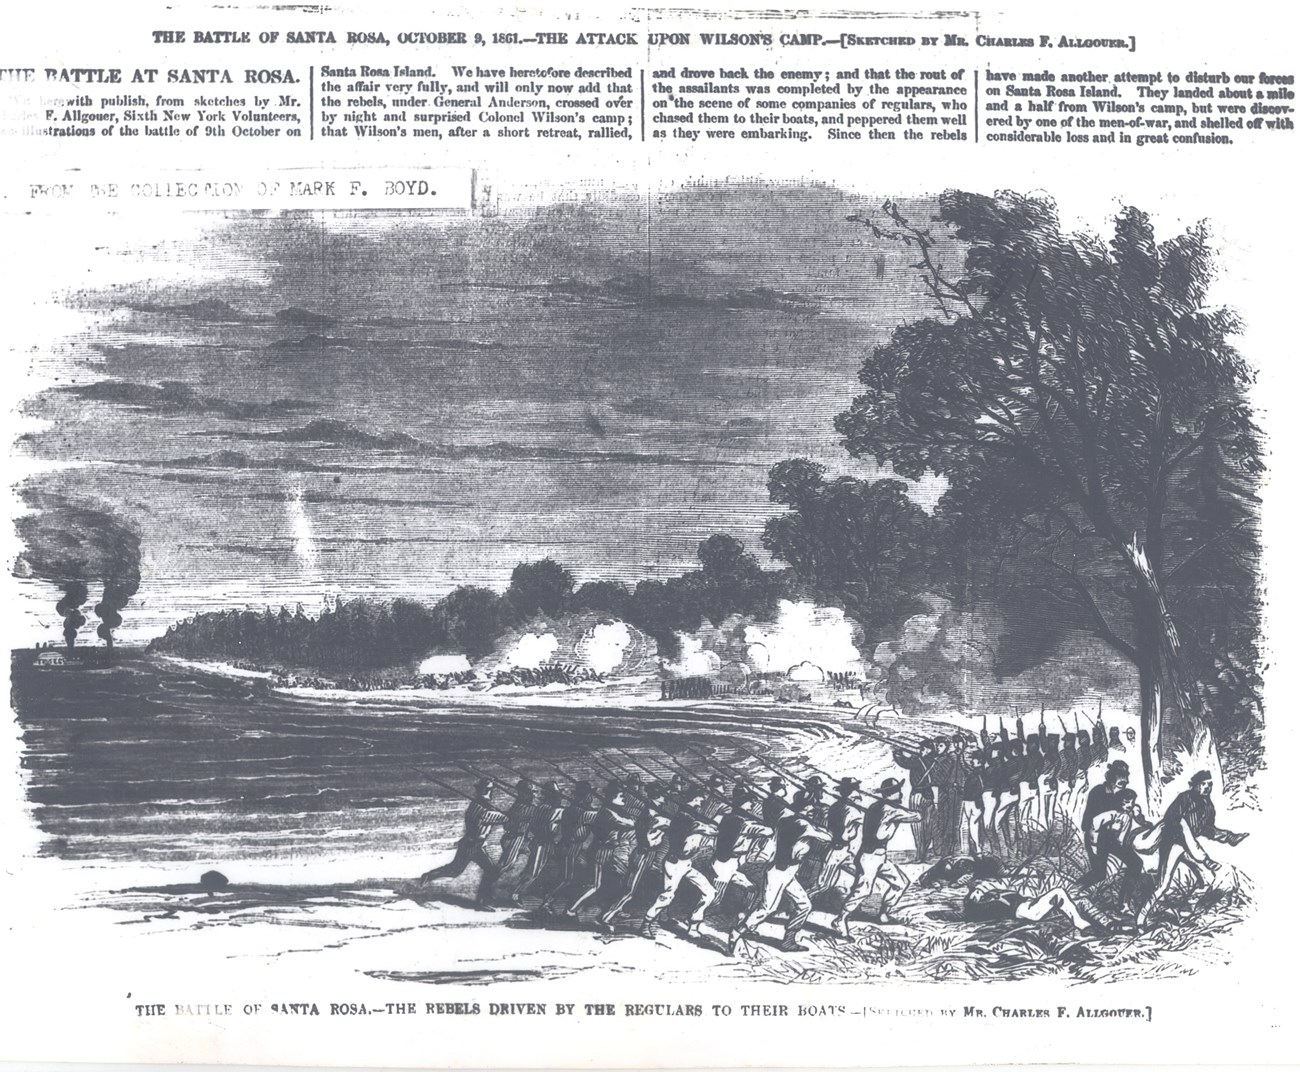 Newspaper etching showing soldiers marching across a beach.